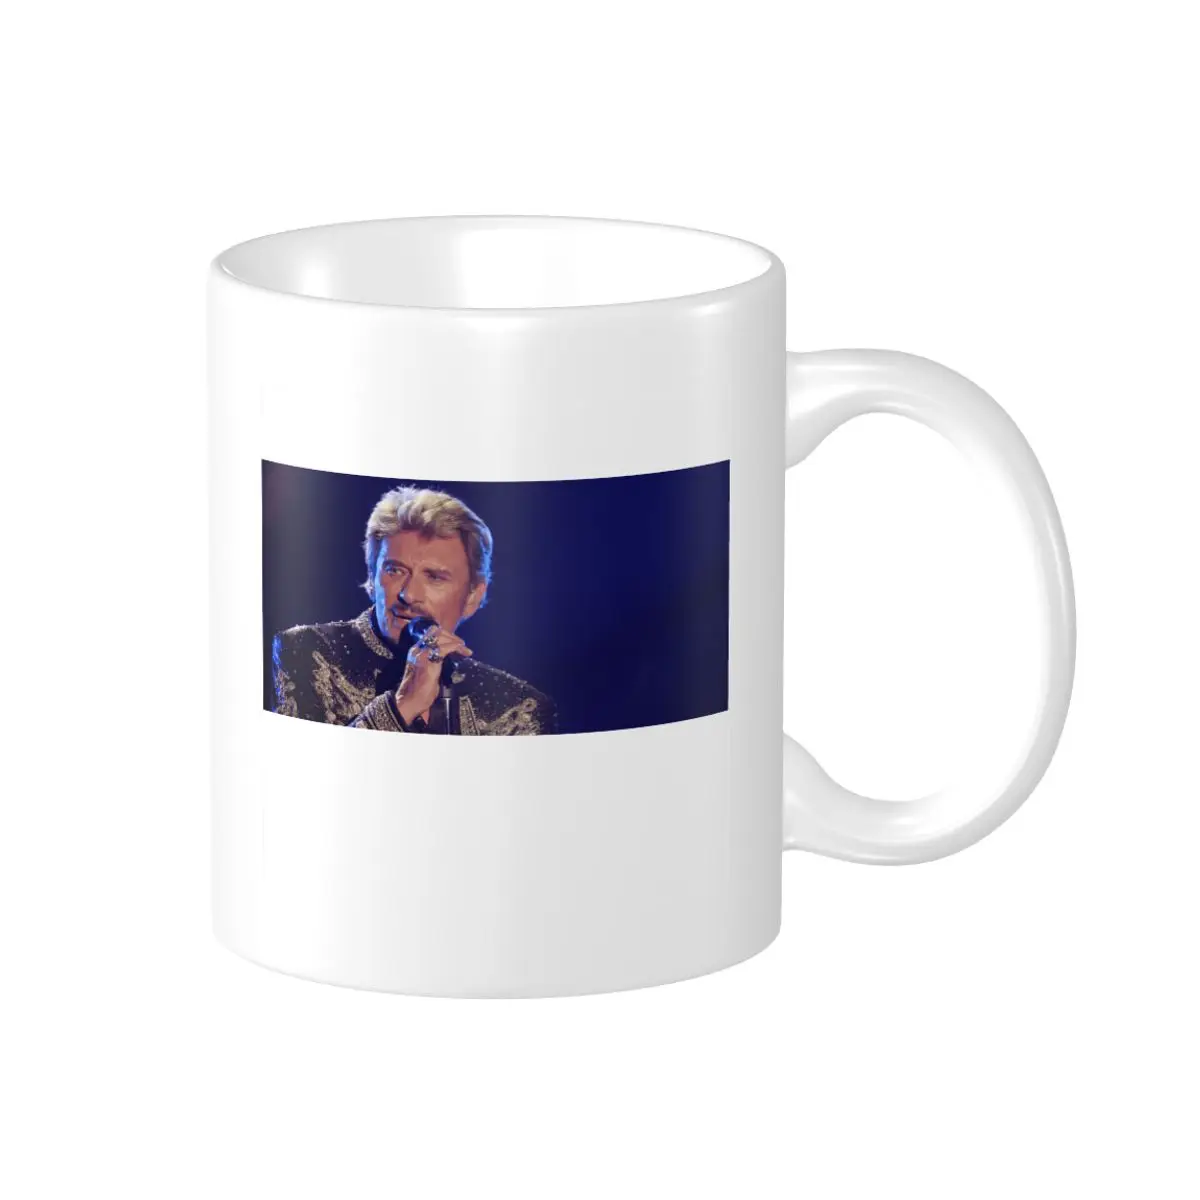 

Promo Johnny And Hallyday(2) Mugs Unique Cups CUPS Print Humor Graphic R337 multi-function cups